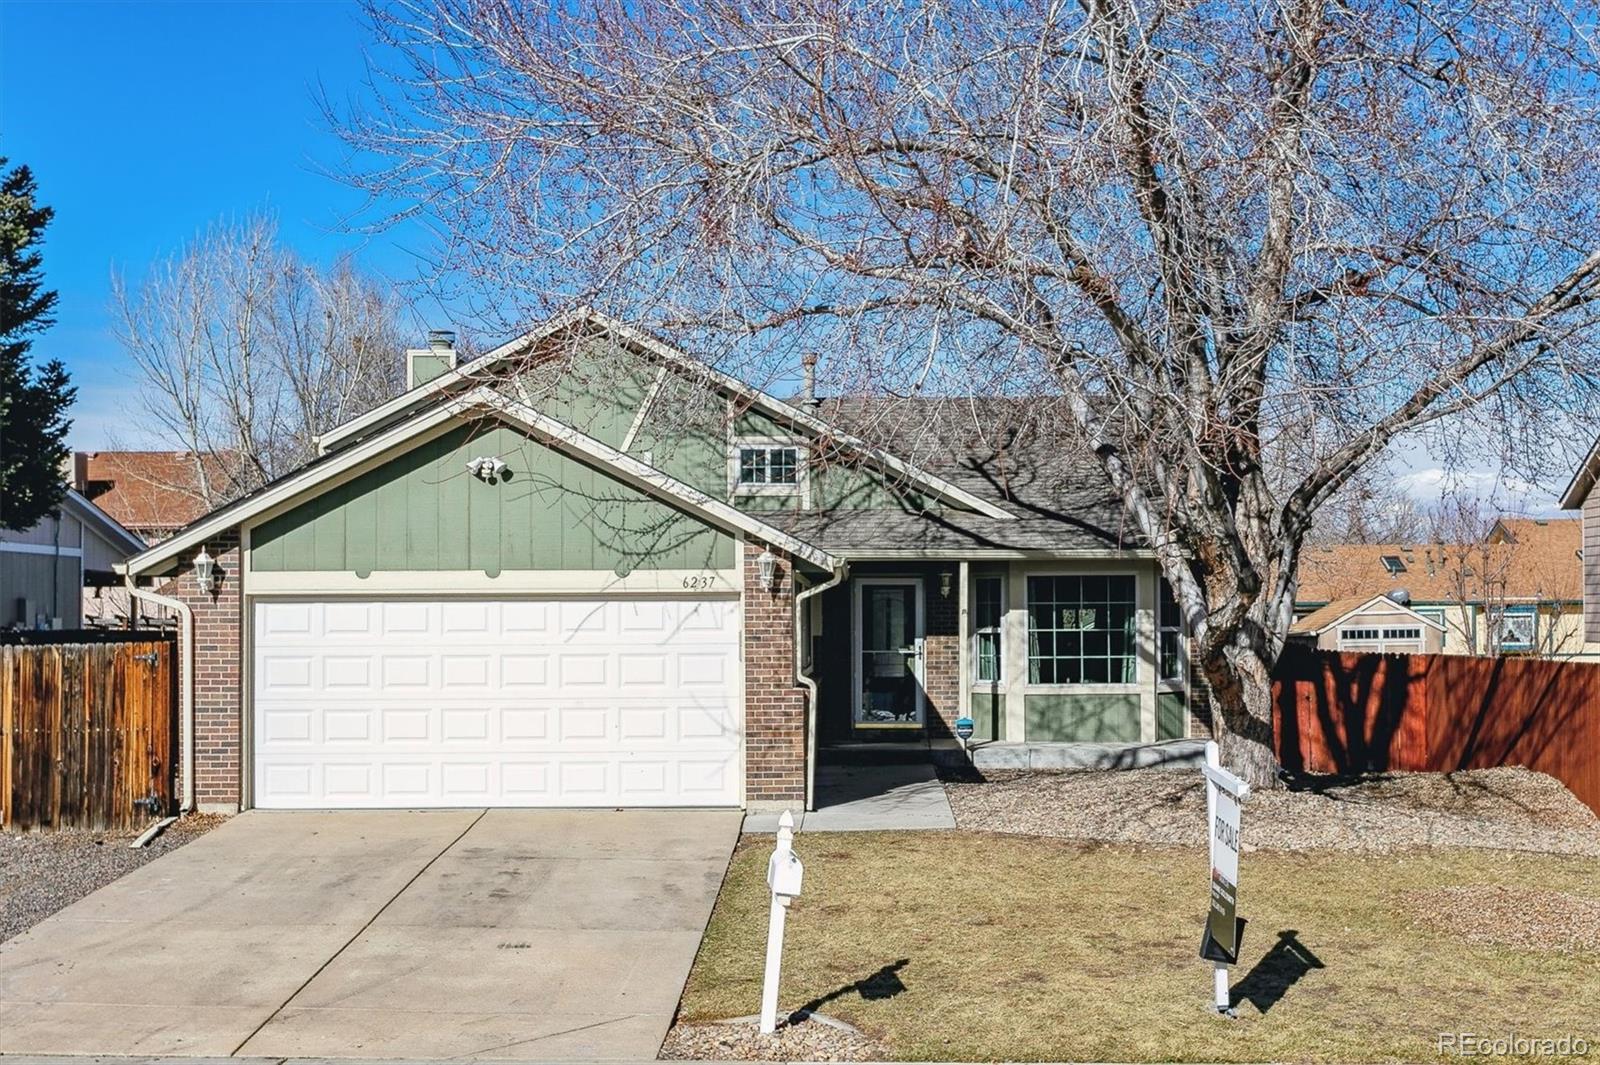 6237 W 68th Place, arvada MLS: 3961220 Beds: 4 Baths: 3 Price: $585,000